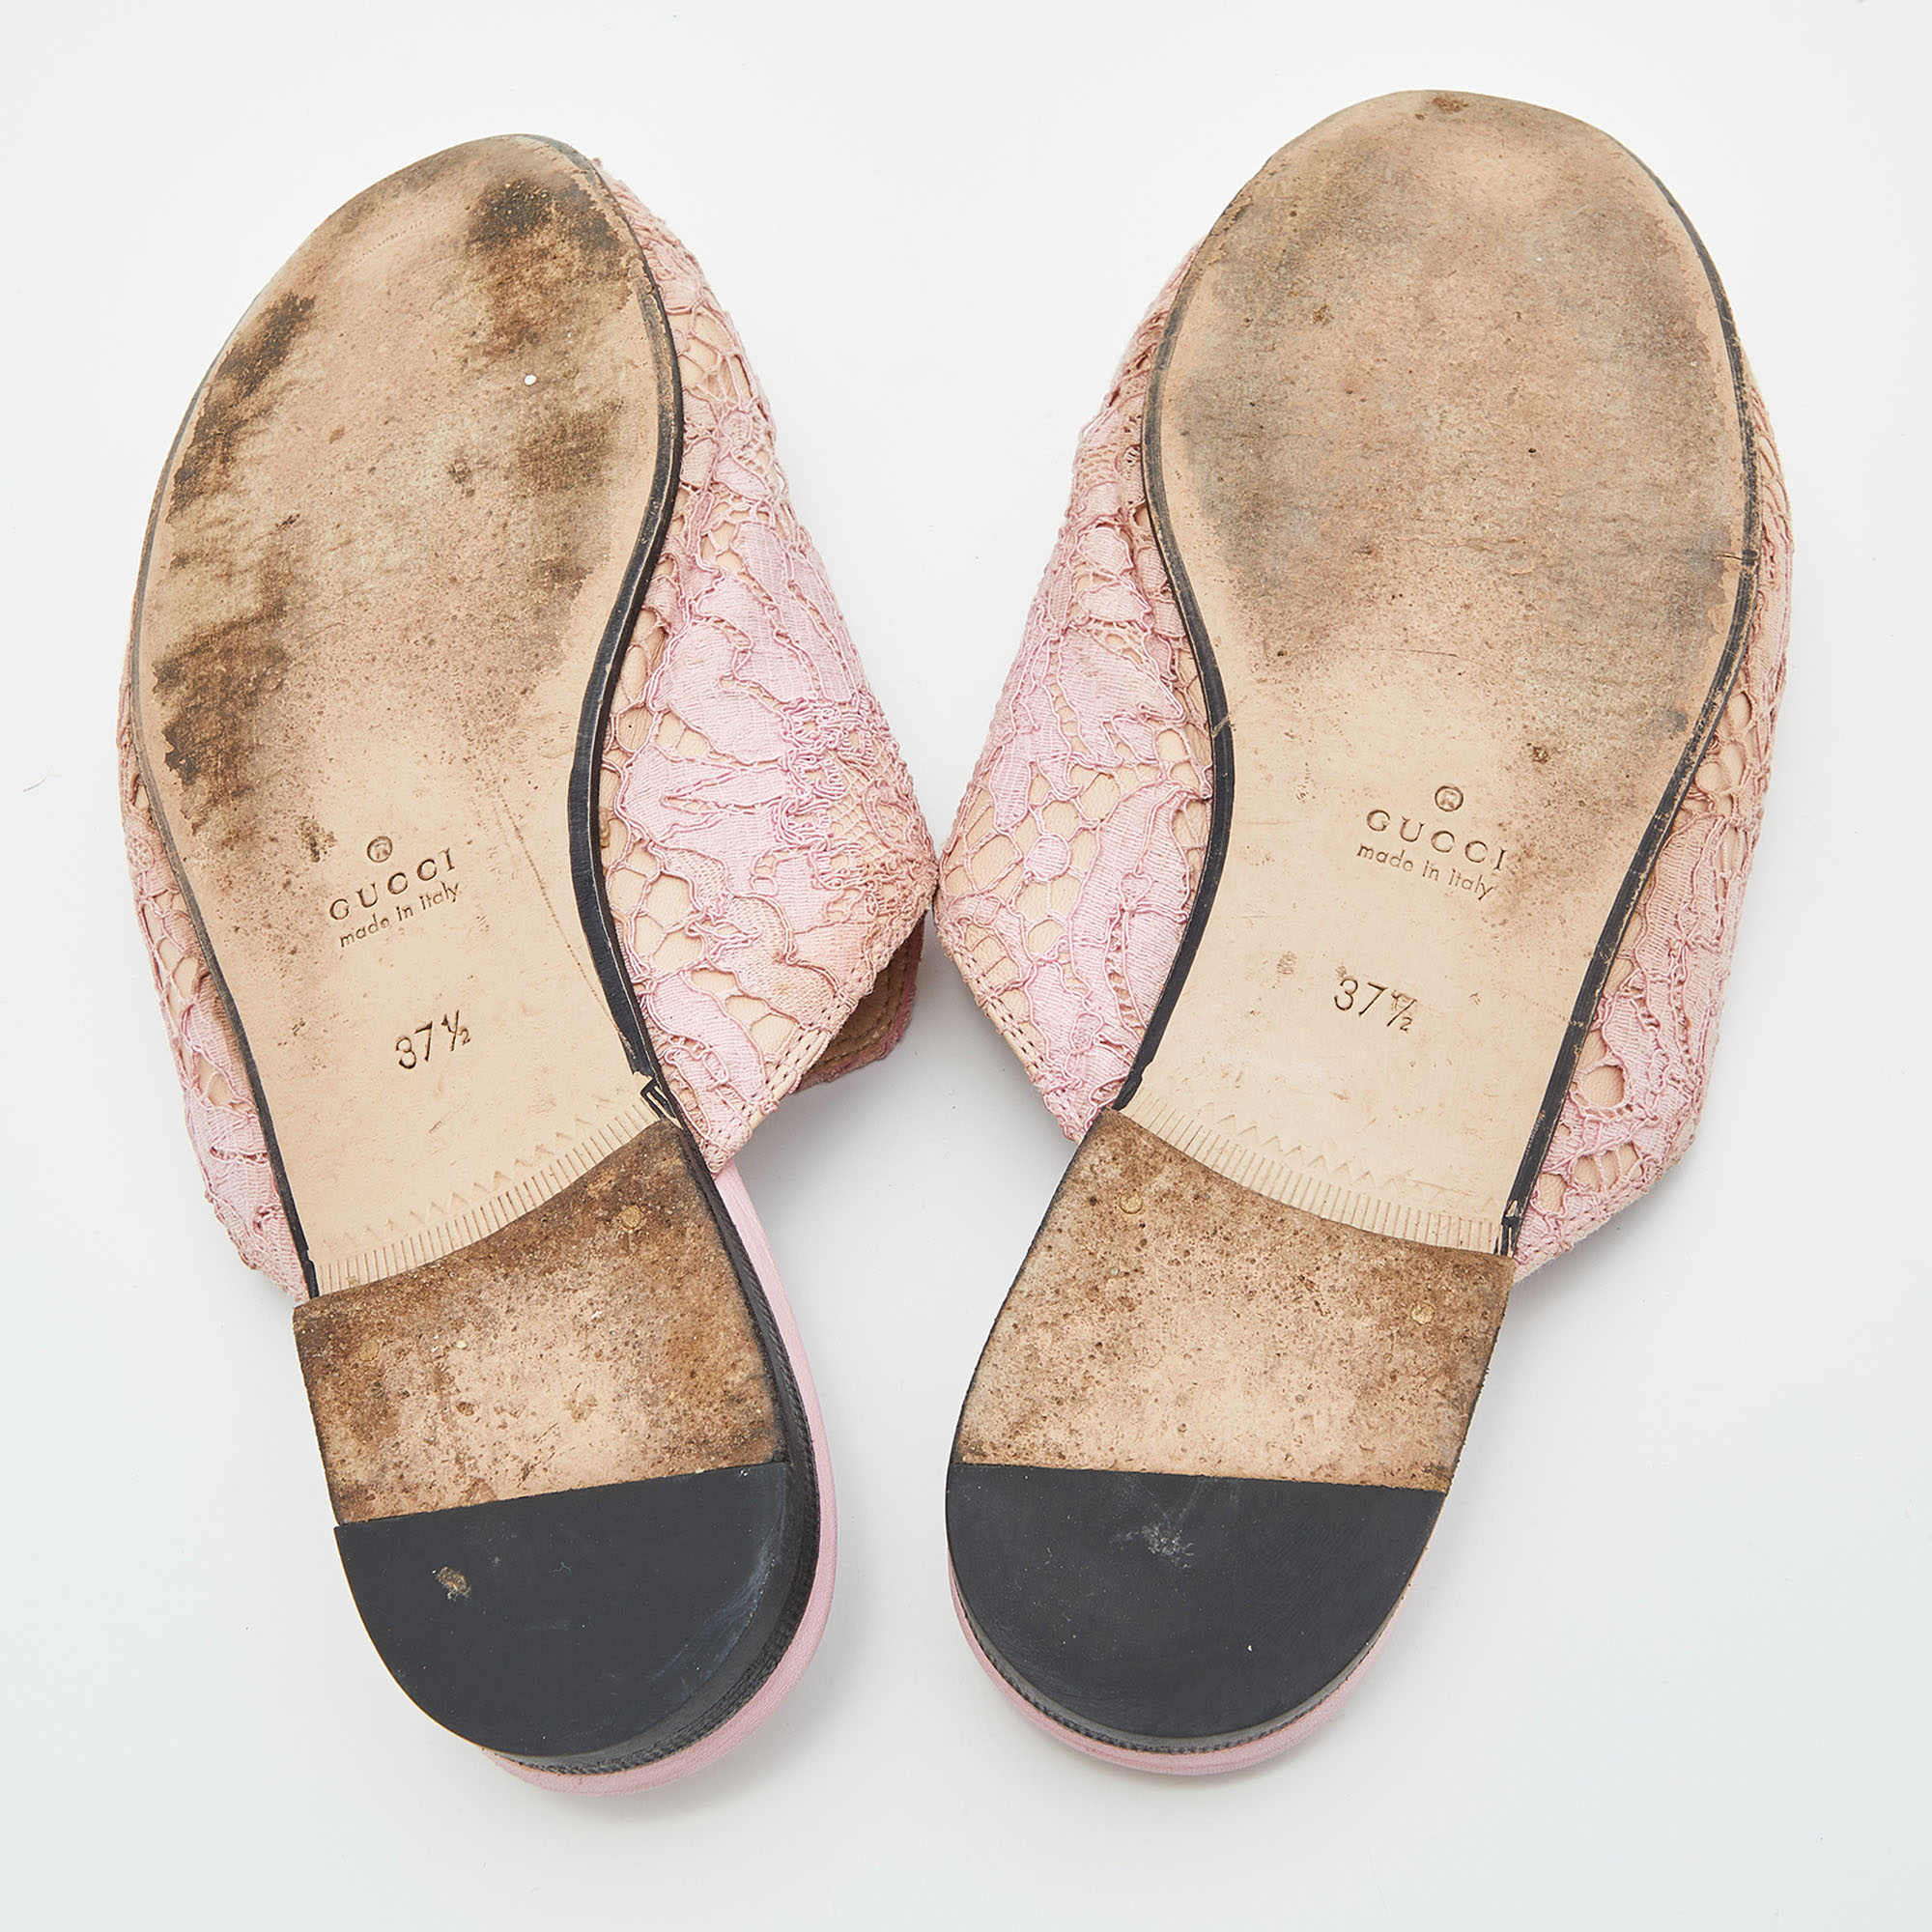 Gucci Pink Floral Lace And Leather Princetown Flat Mule Size 37.5